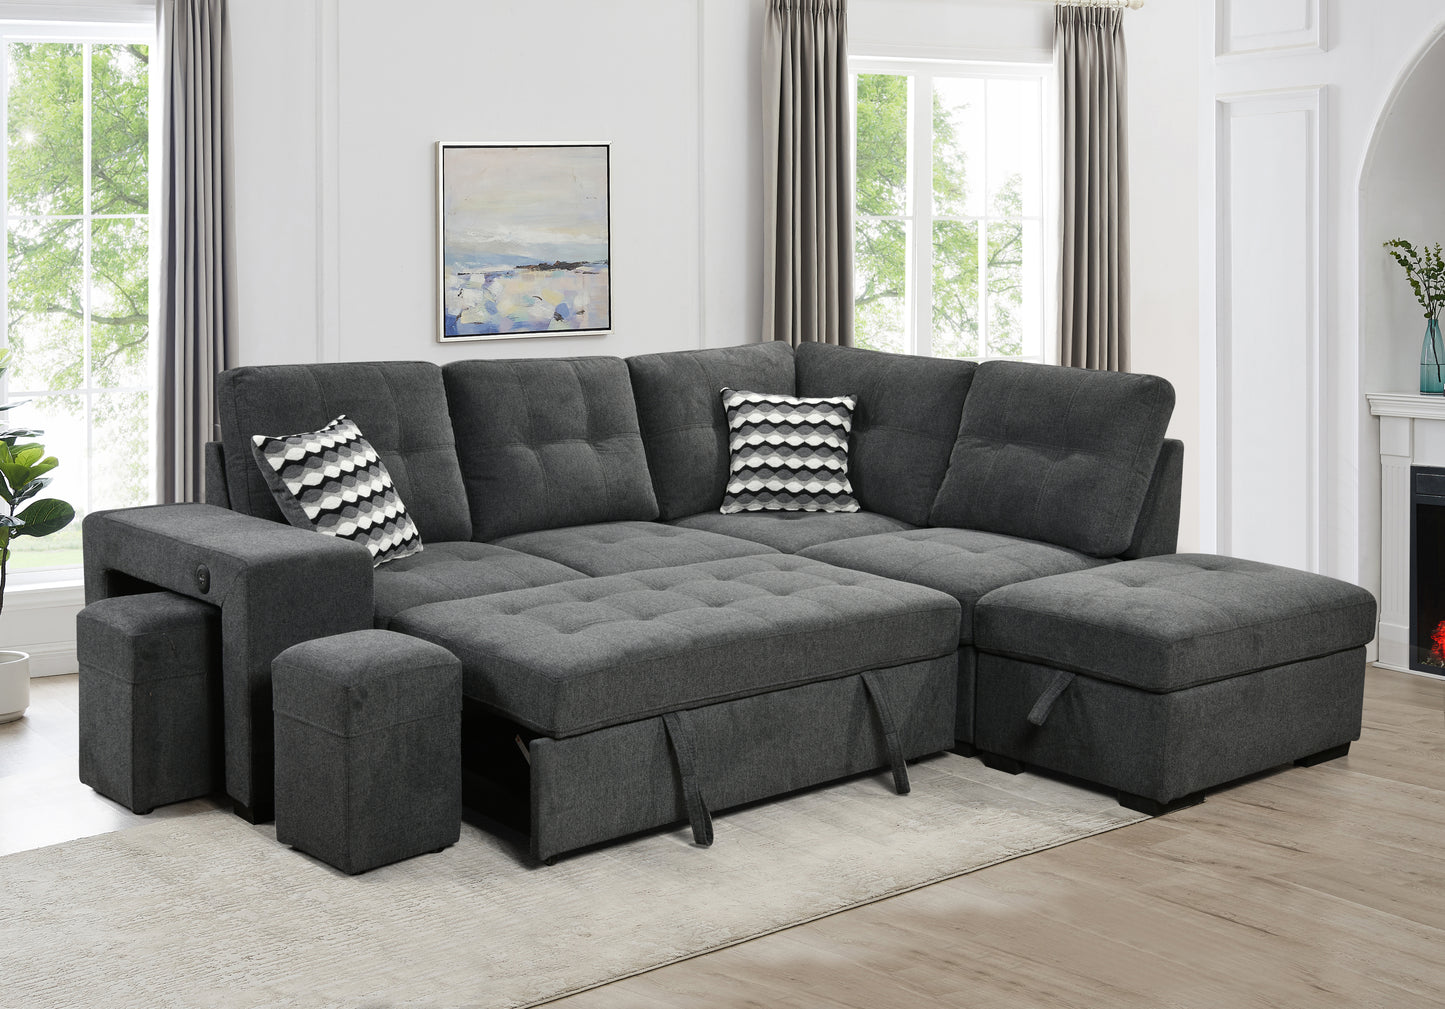 Sectional Pull Out Sofa Bed 101" Reversible L-Shaped Corner Sleeper Upholstered Couch with Storage Ottoman, 2 Pillows,USB Ports,2 Stools for Living Room Furniture Sets,Apartments,Dark Gray